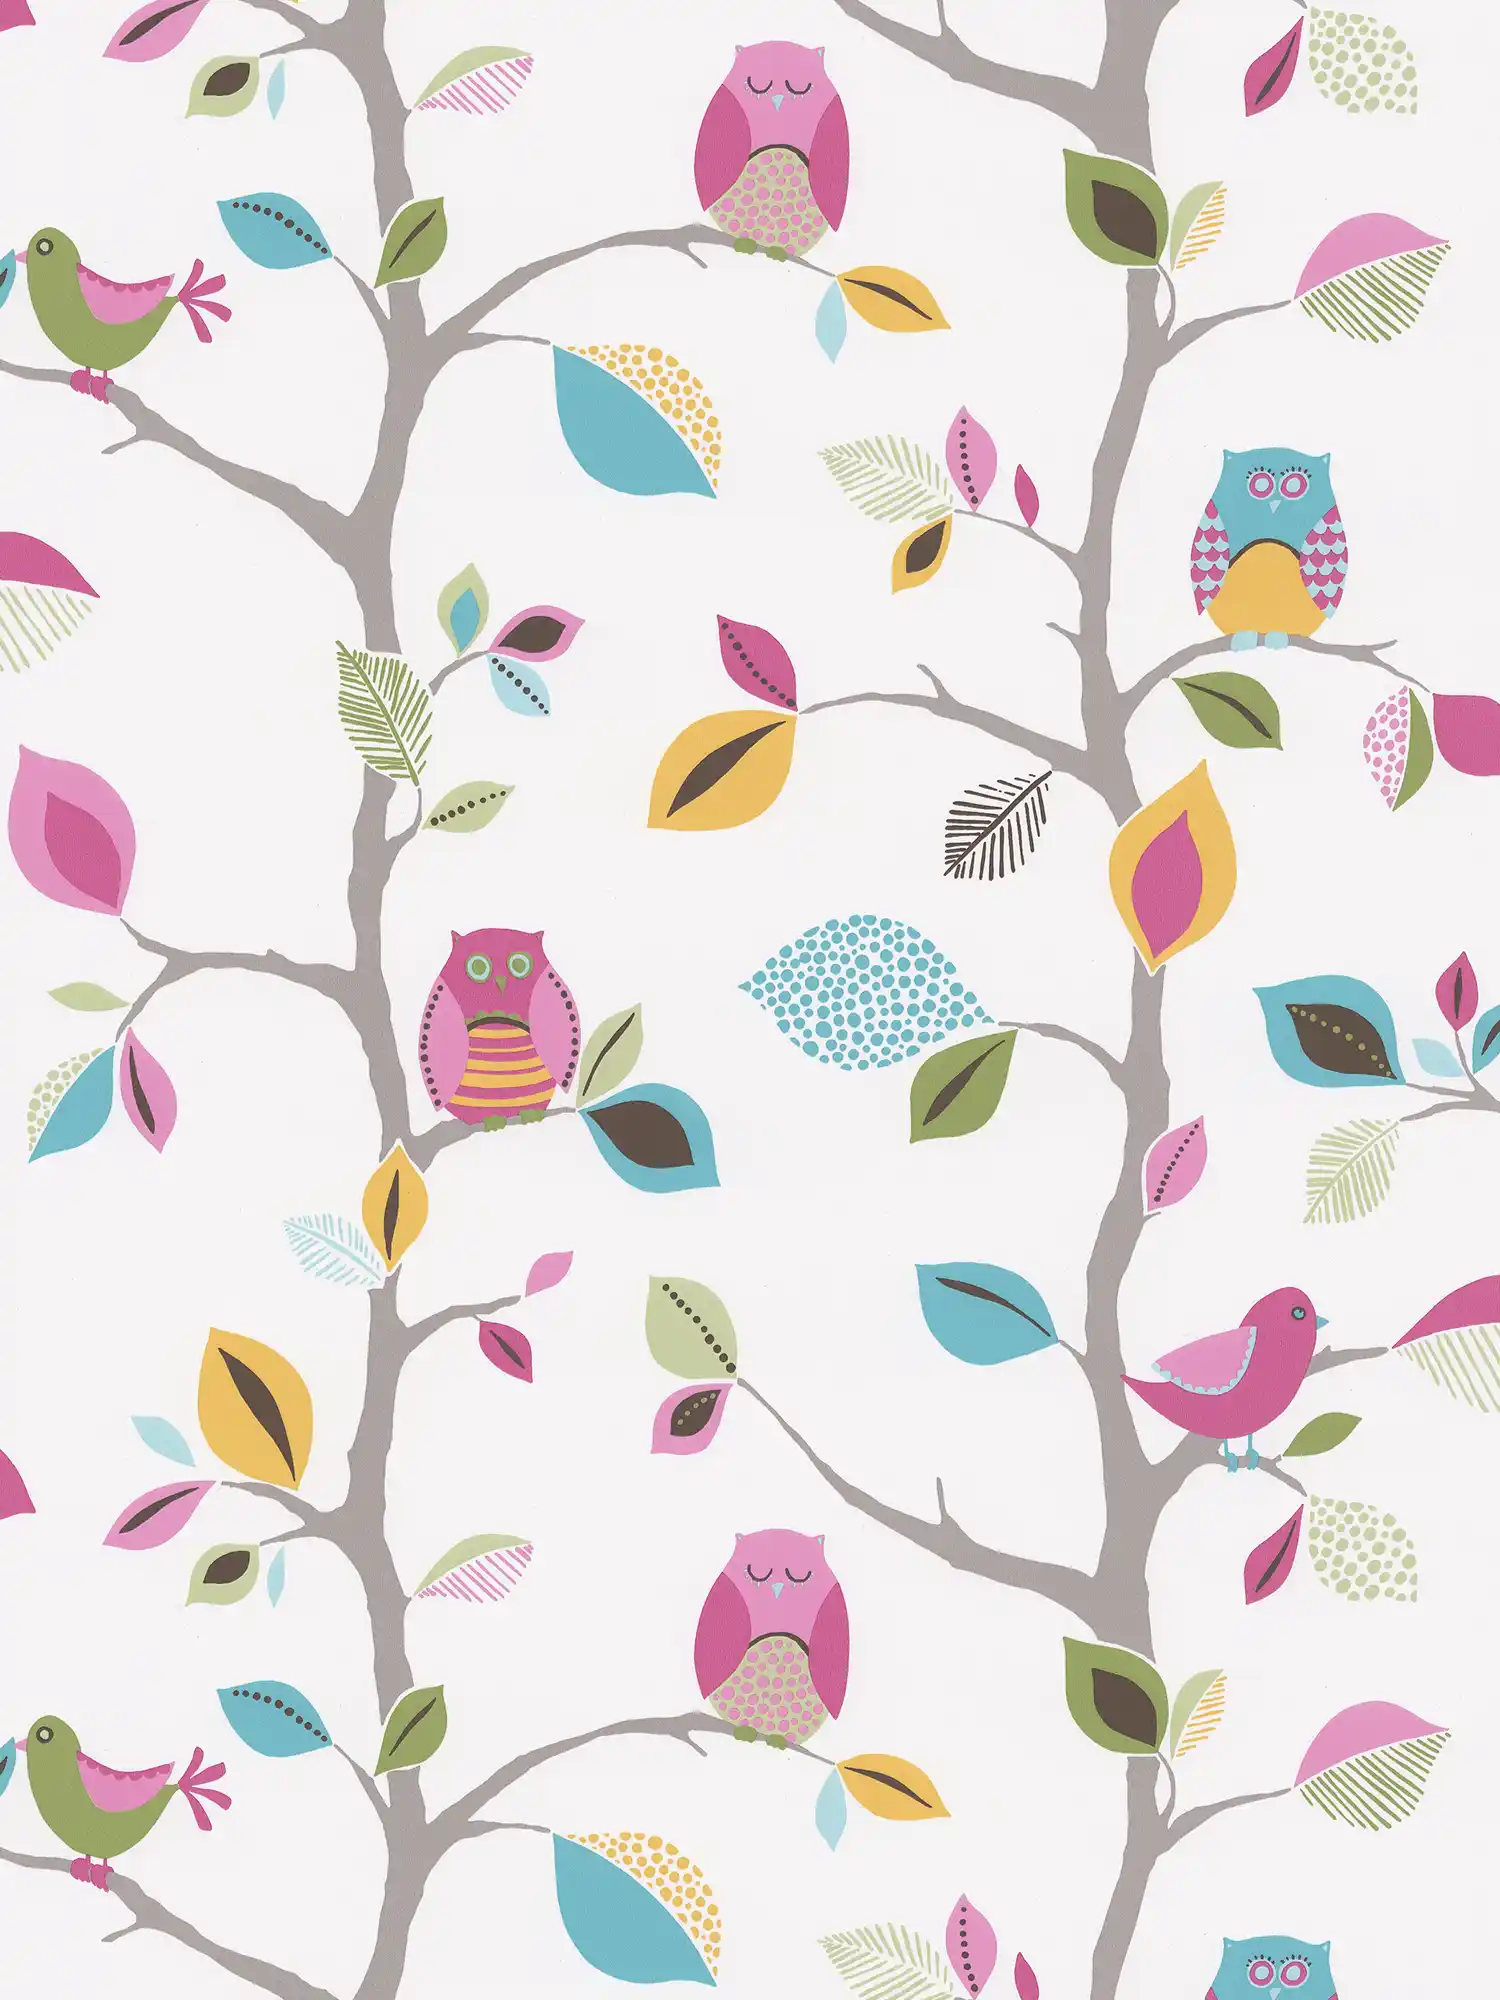         Nursery wallpaper paper with owls & birds - colourful, green
    